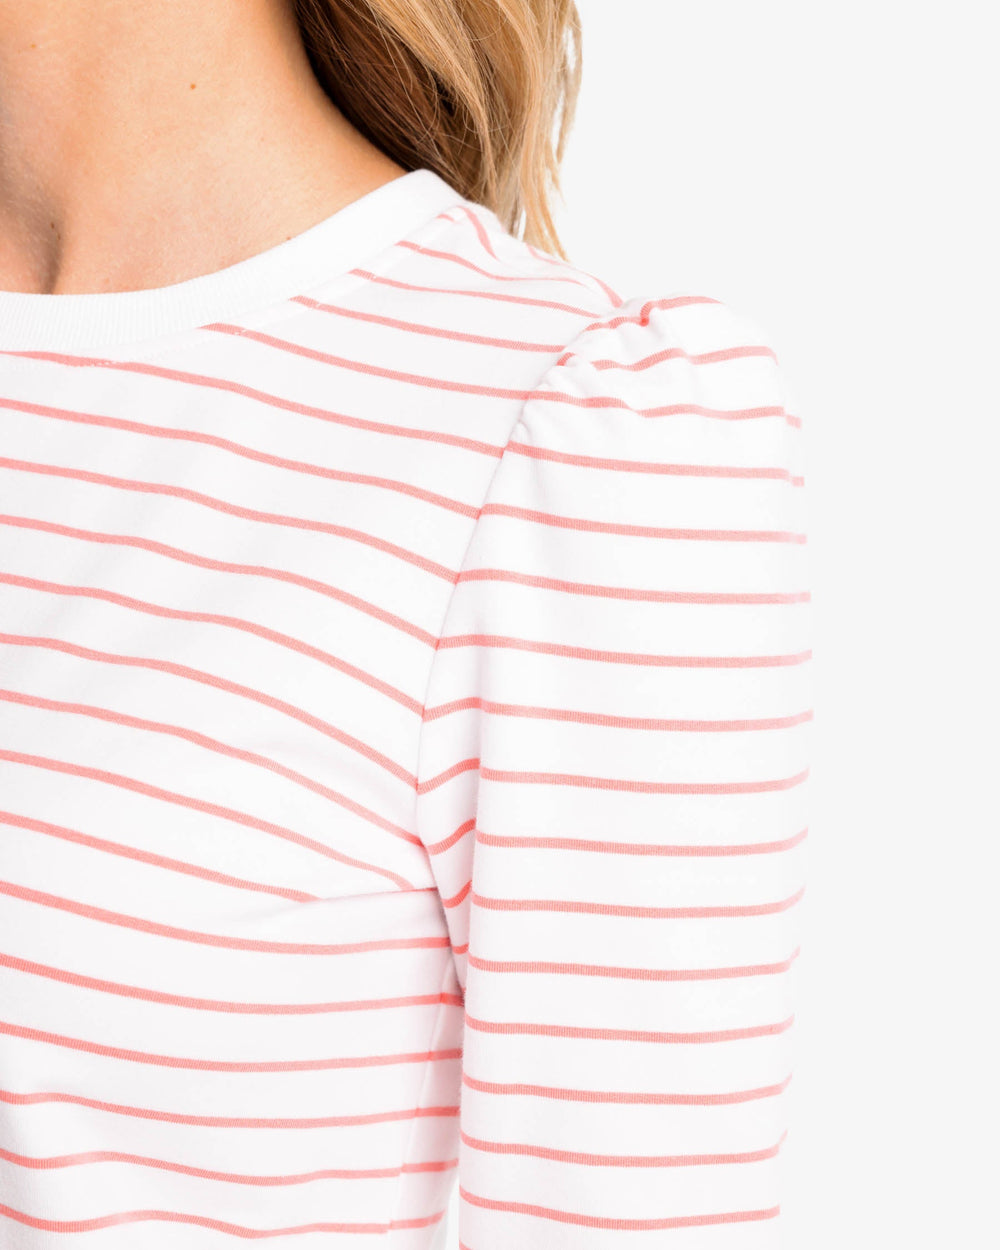 The detail view of the Jayne Striped Terry Sweatshirt by Southern Tide - Classic White